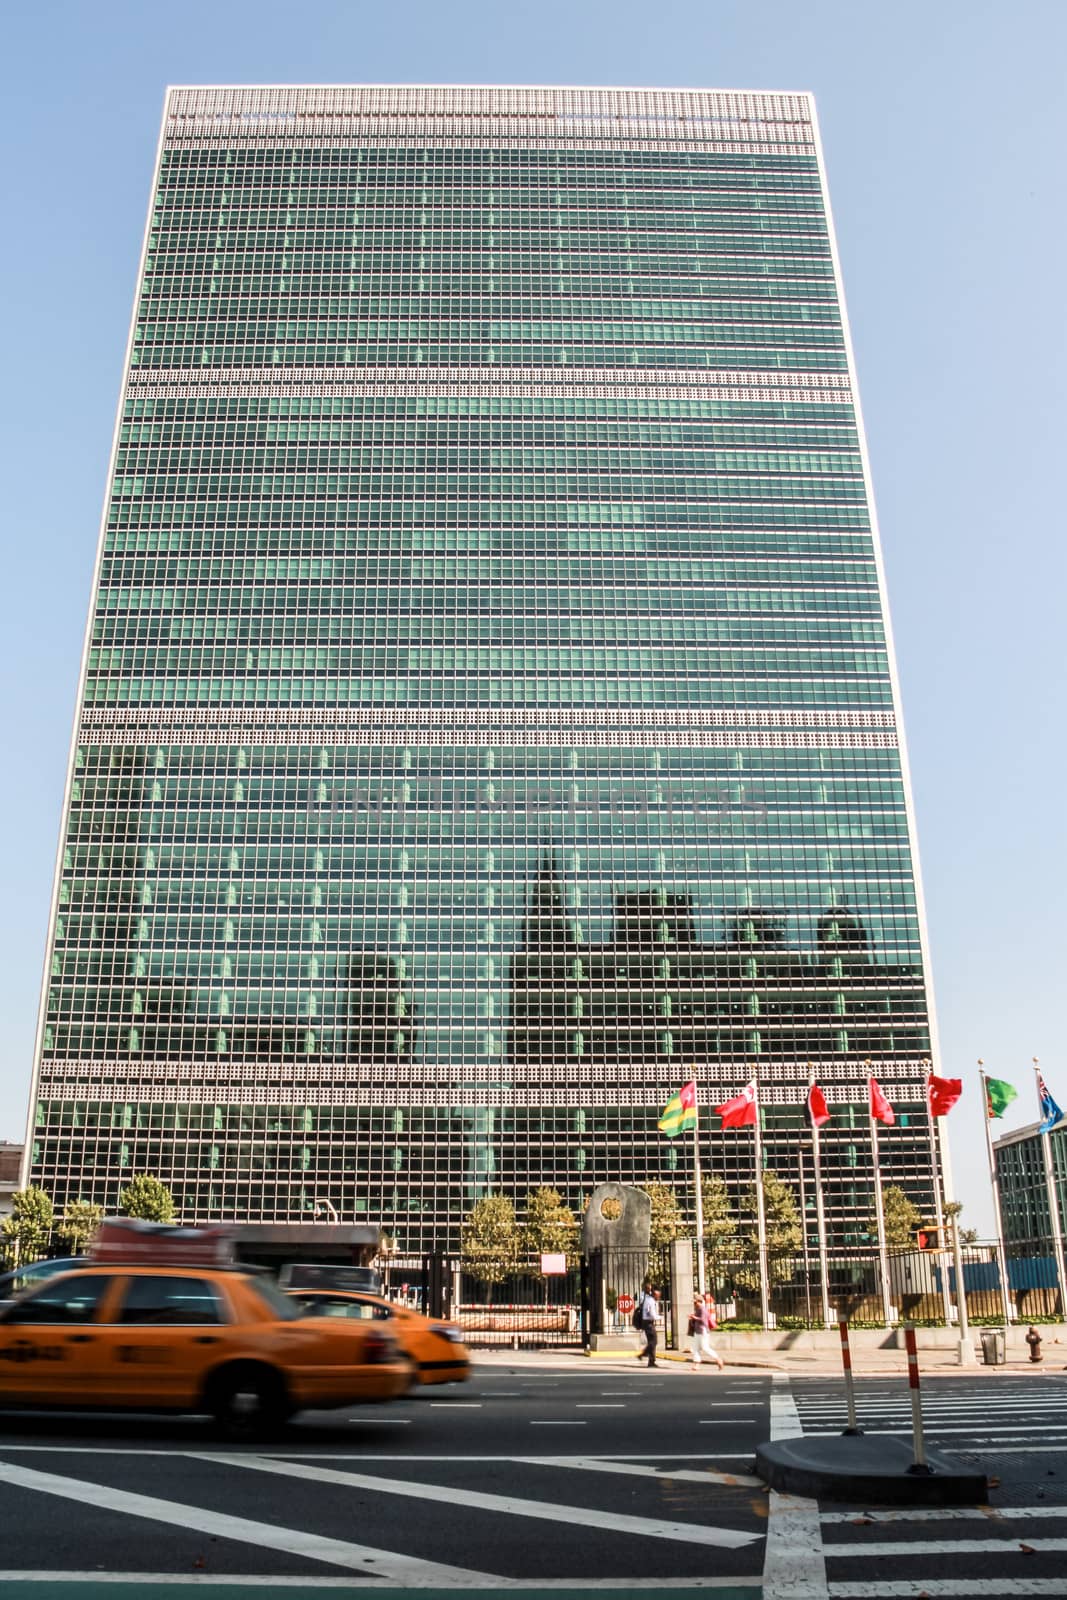 United Nations Headquarter in New York City by IVYPHOTOS